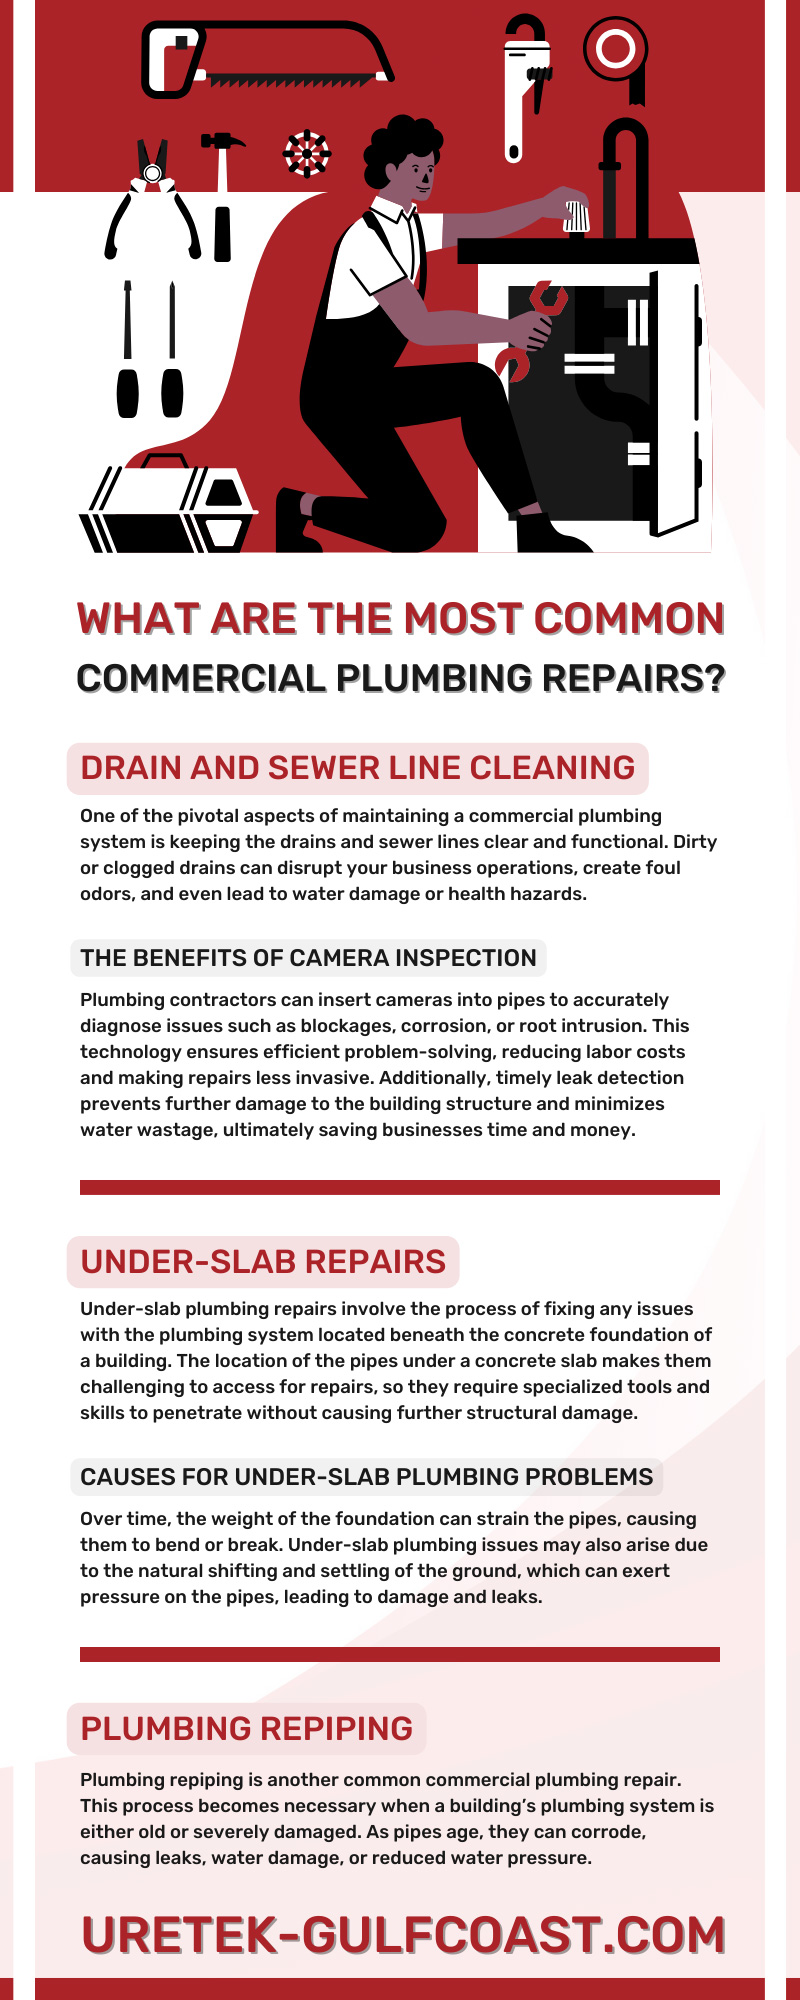 What Are the Most Common Commercial Plumbing Repairs?